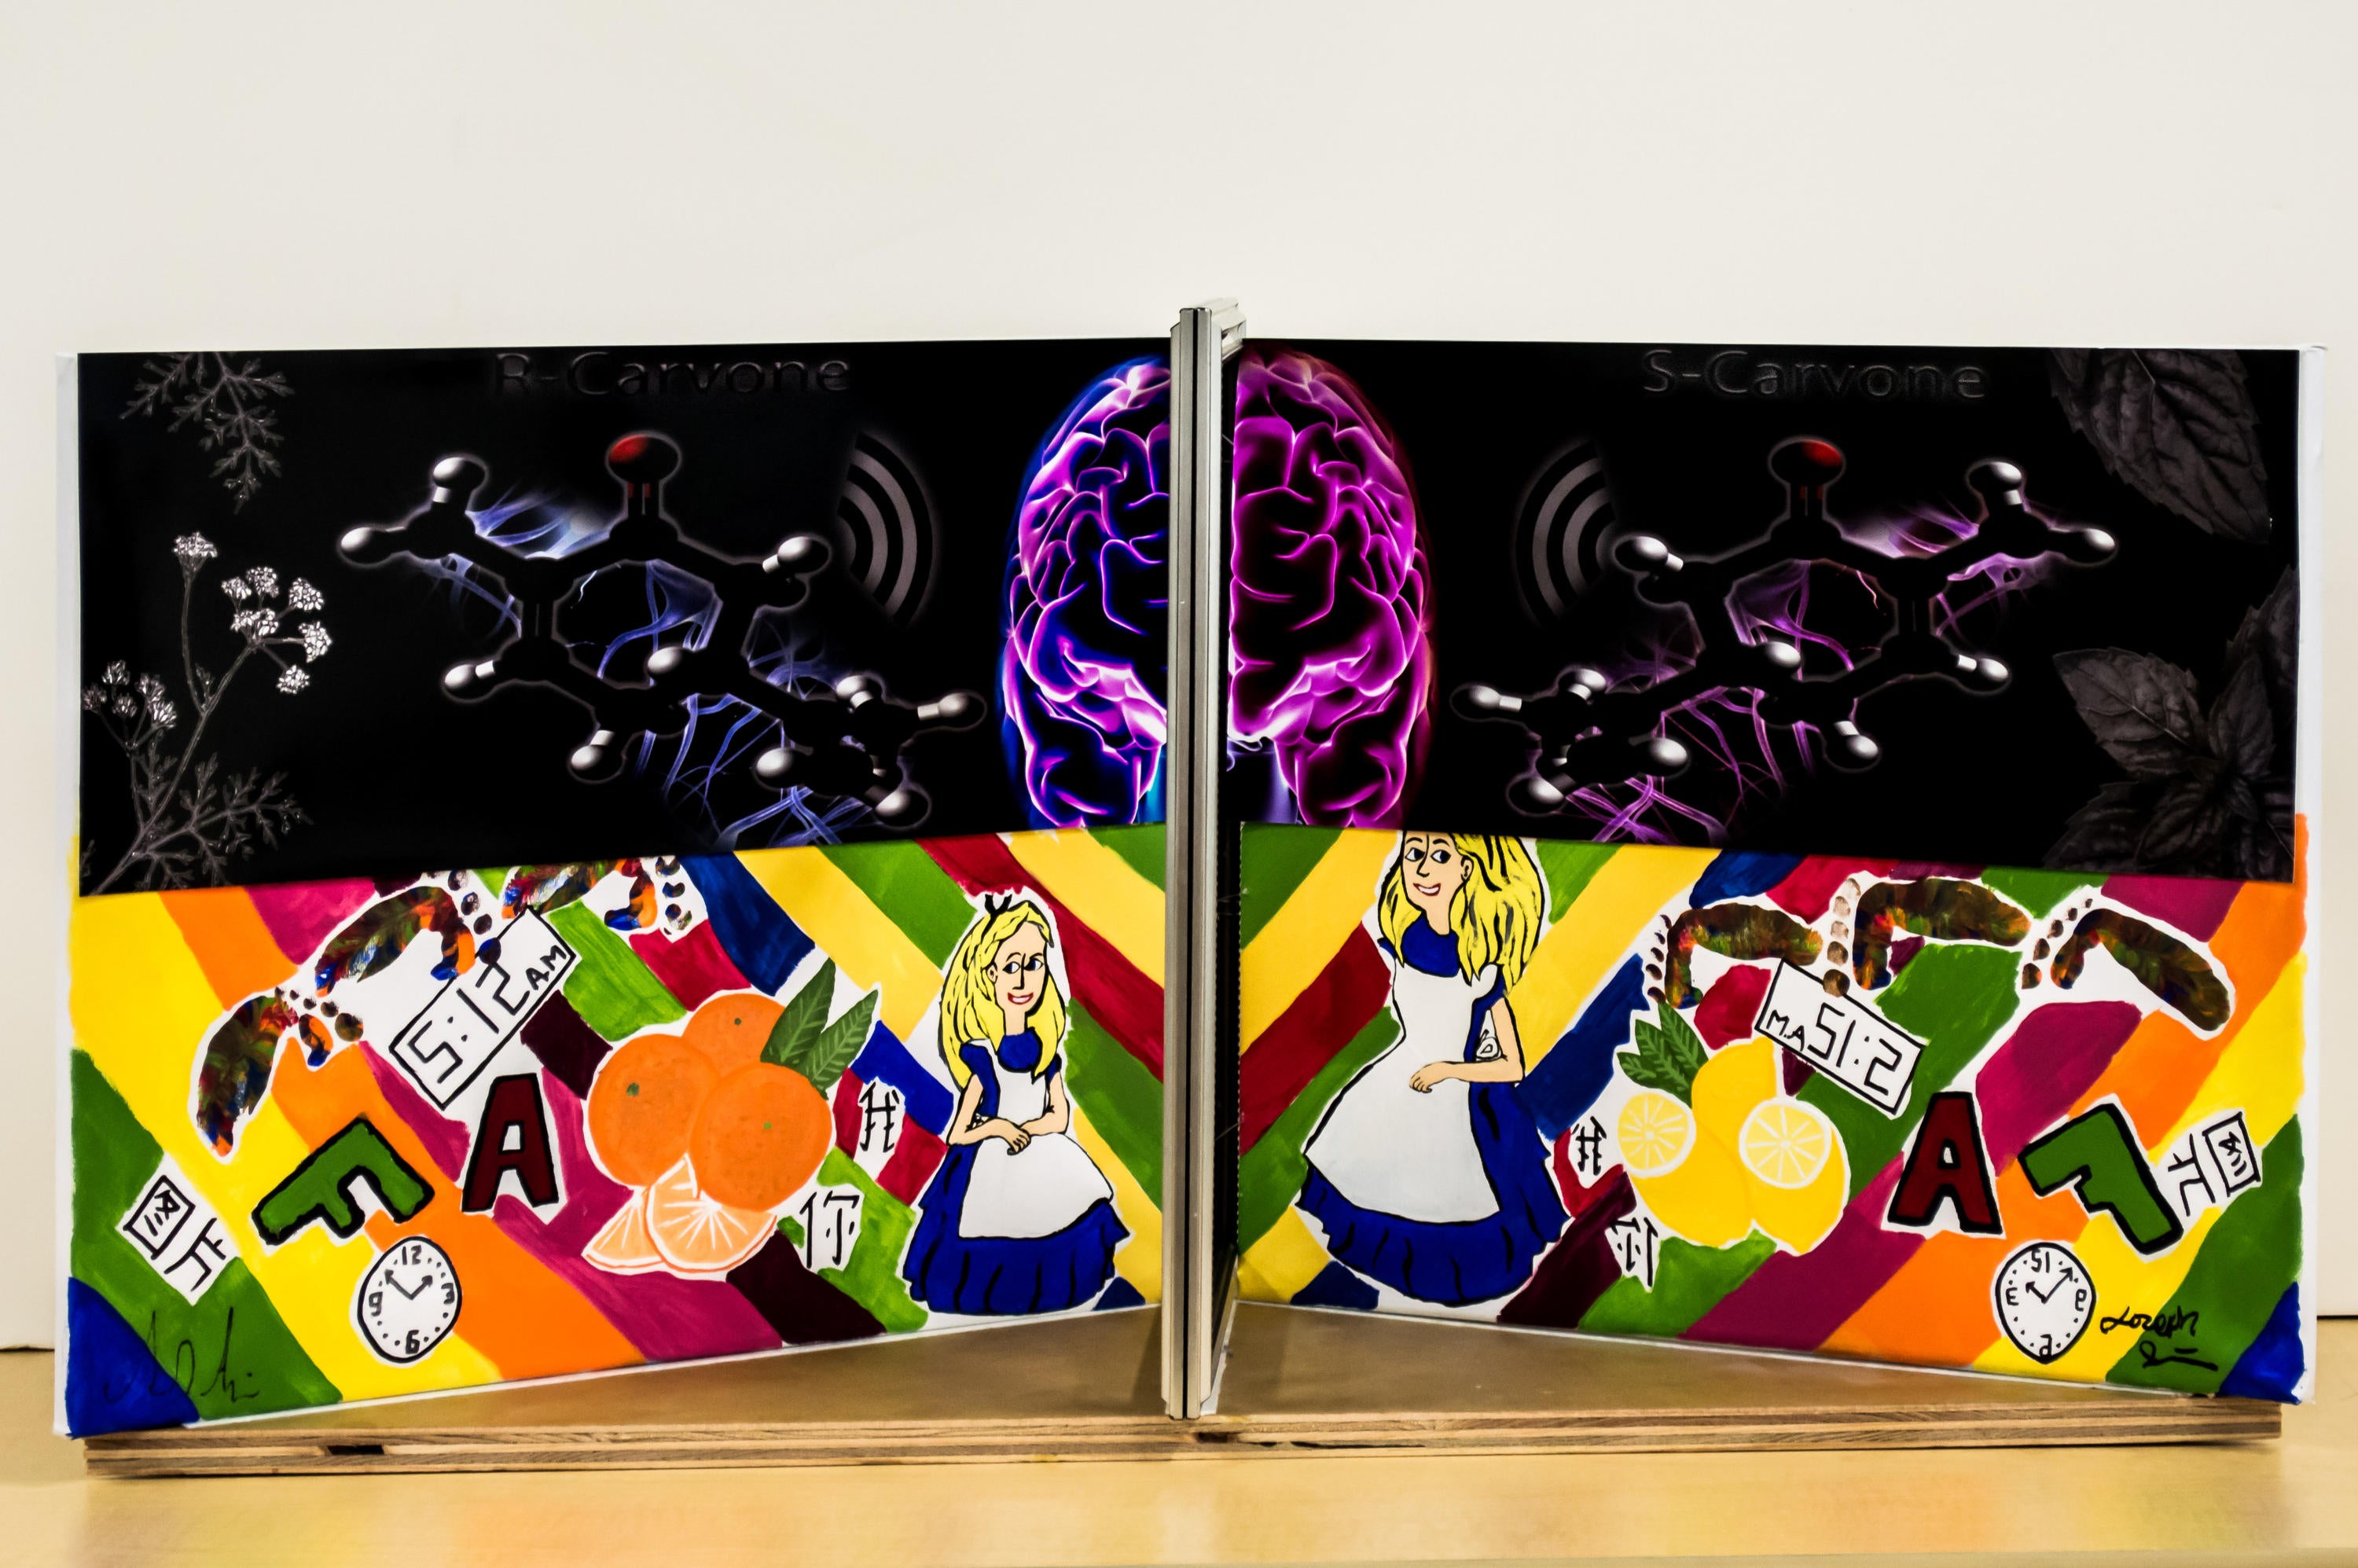 Alice through the looking glass – two painting of Alice in Wonderland that are mirror reflections of each other